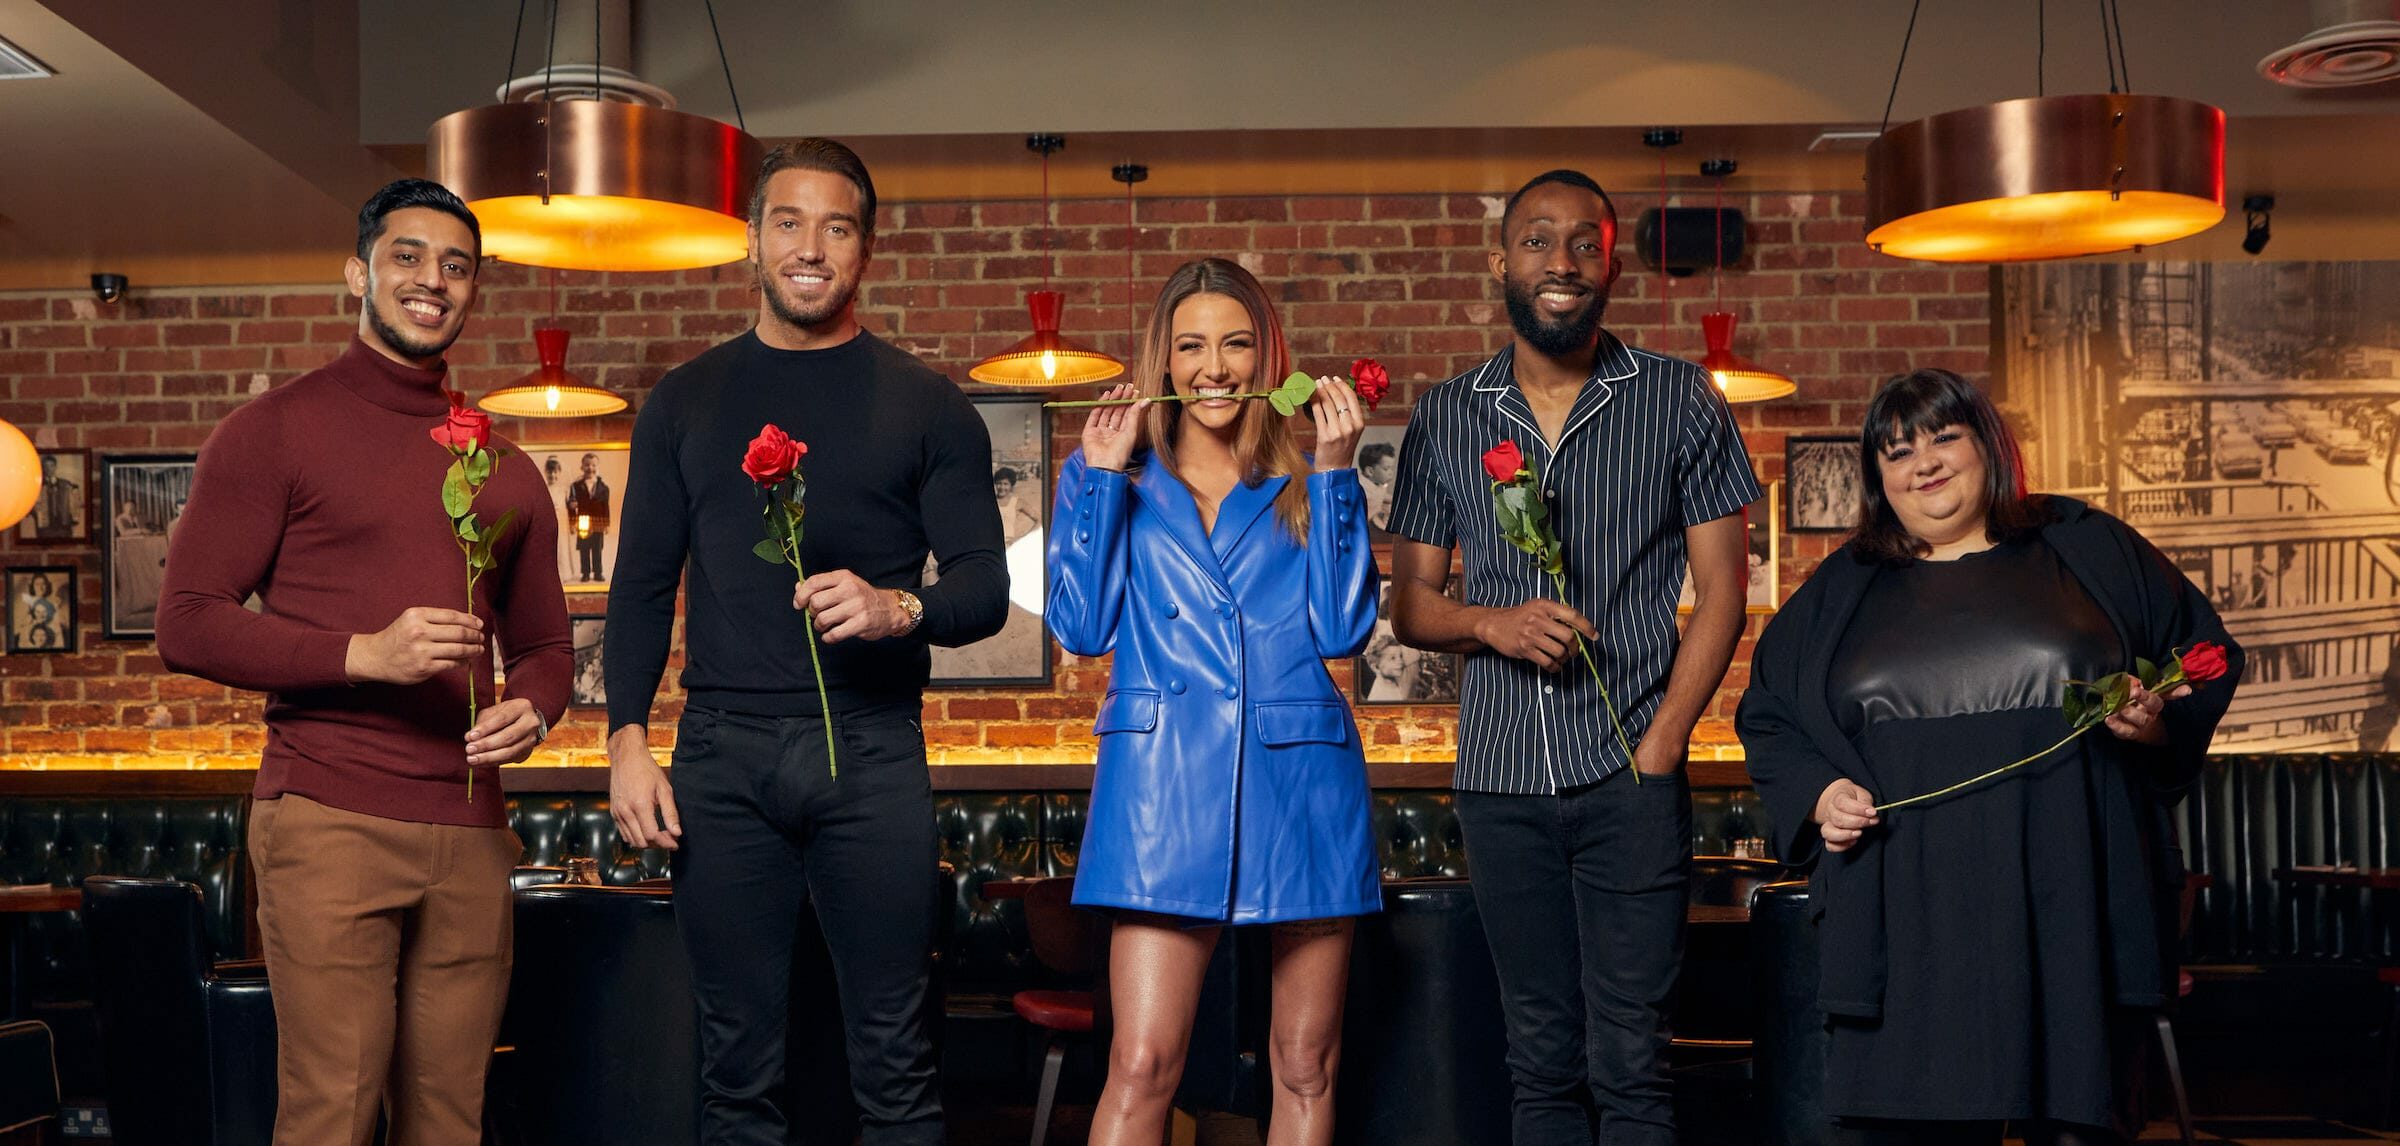 This Valentine’s Day Frankie & Benny’s “Take A-Bae” Service, Allows Solo Diners To Choose A Date To Dine With, Including Reality TV Stars 